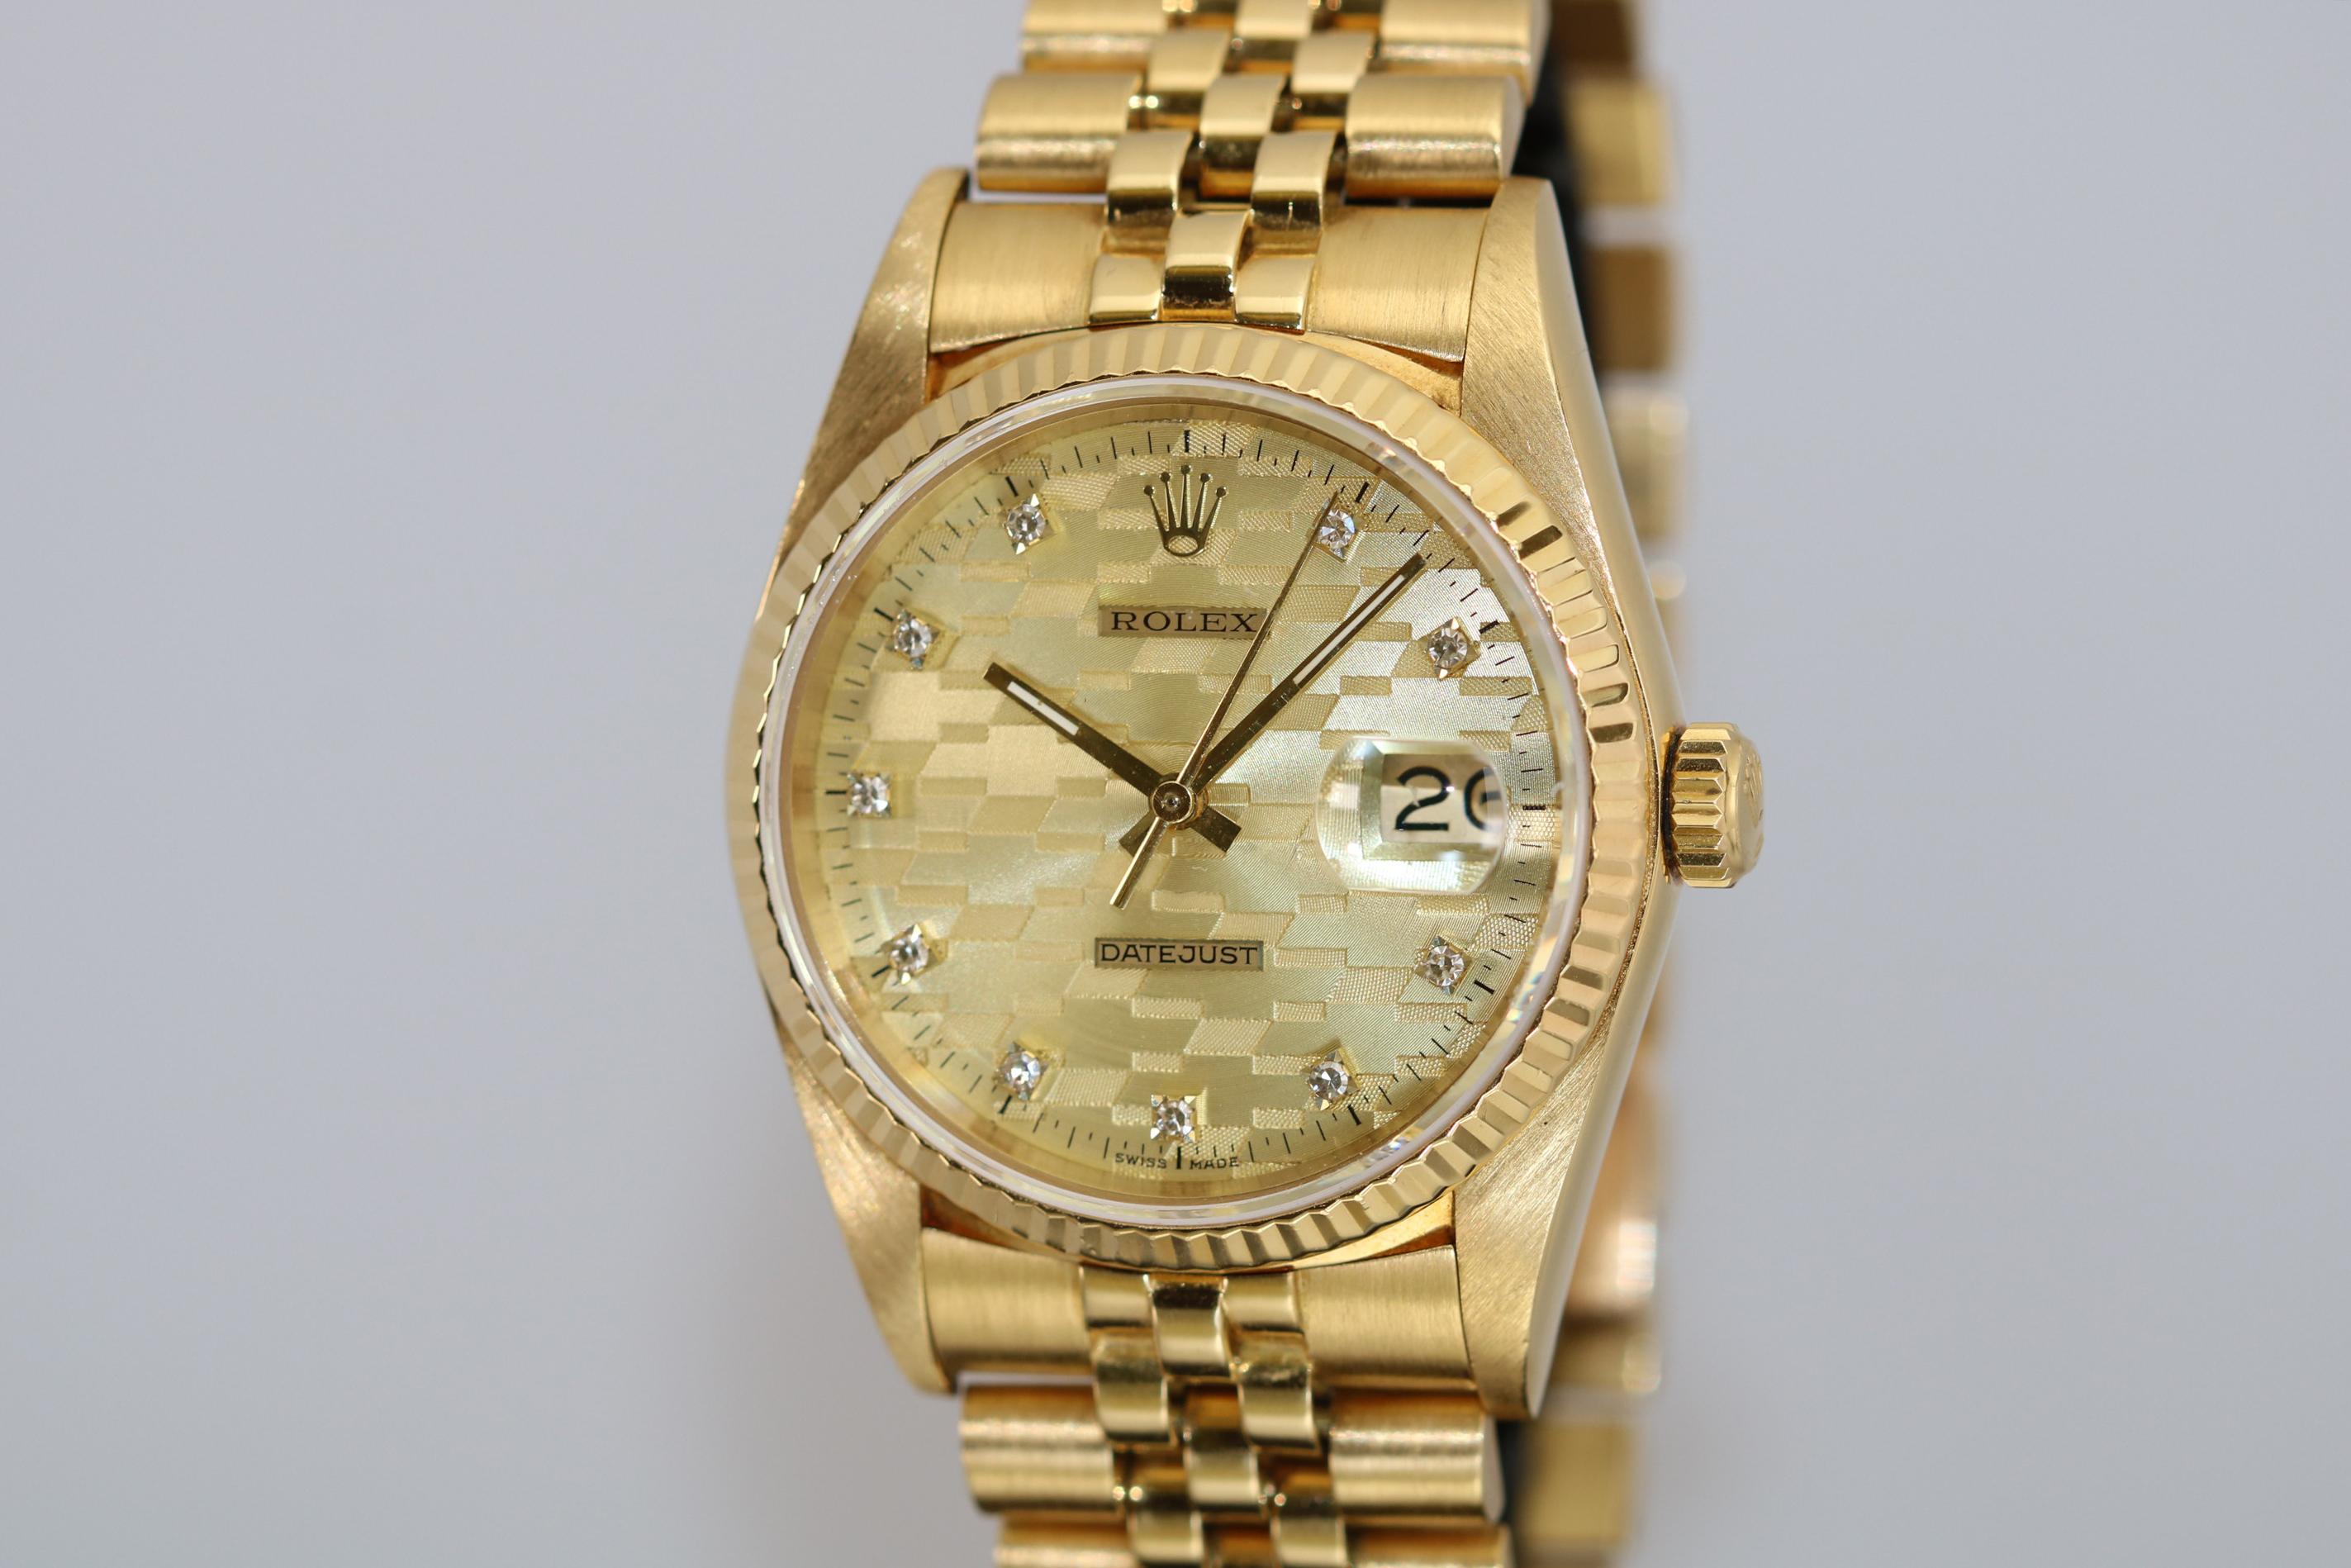 The champagne dial on this Rolex Datejust has a great design using the Chevrolet logo aka Chevy and diamonds for the hour markers. This comes on a Rolex Jubilee gold bracelet with hidden clasp. 36mm circa 1986